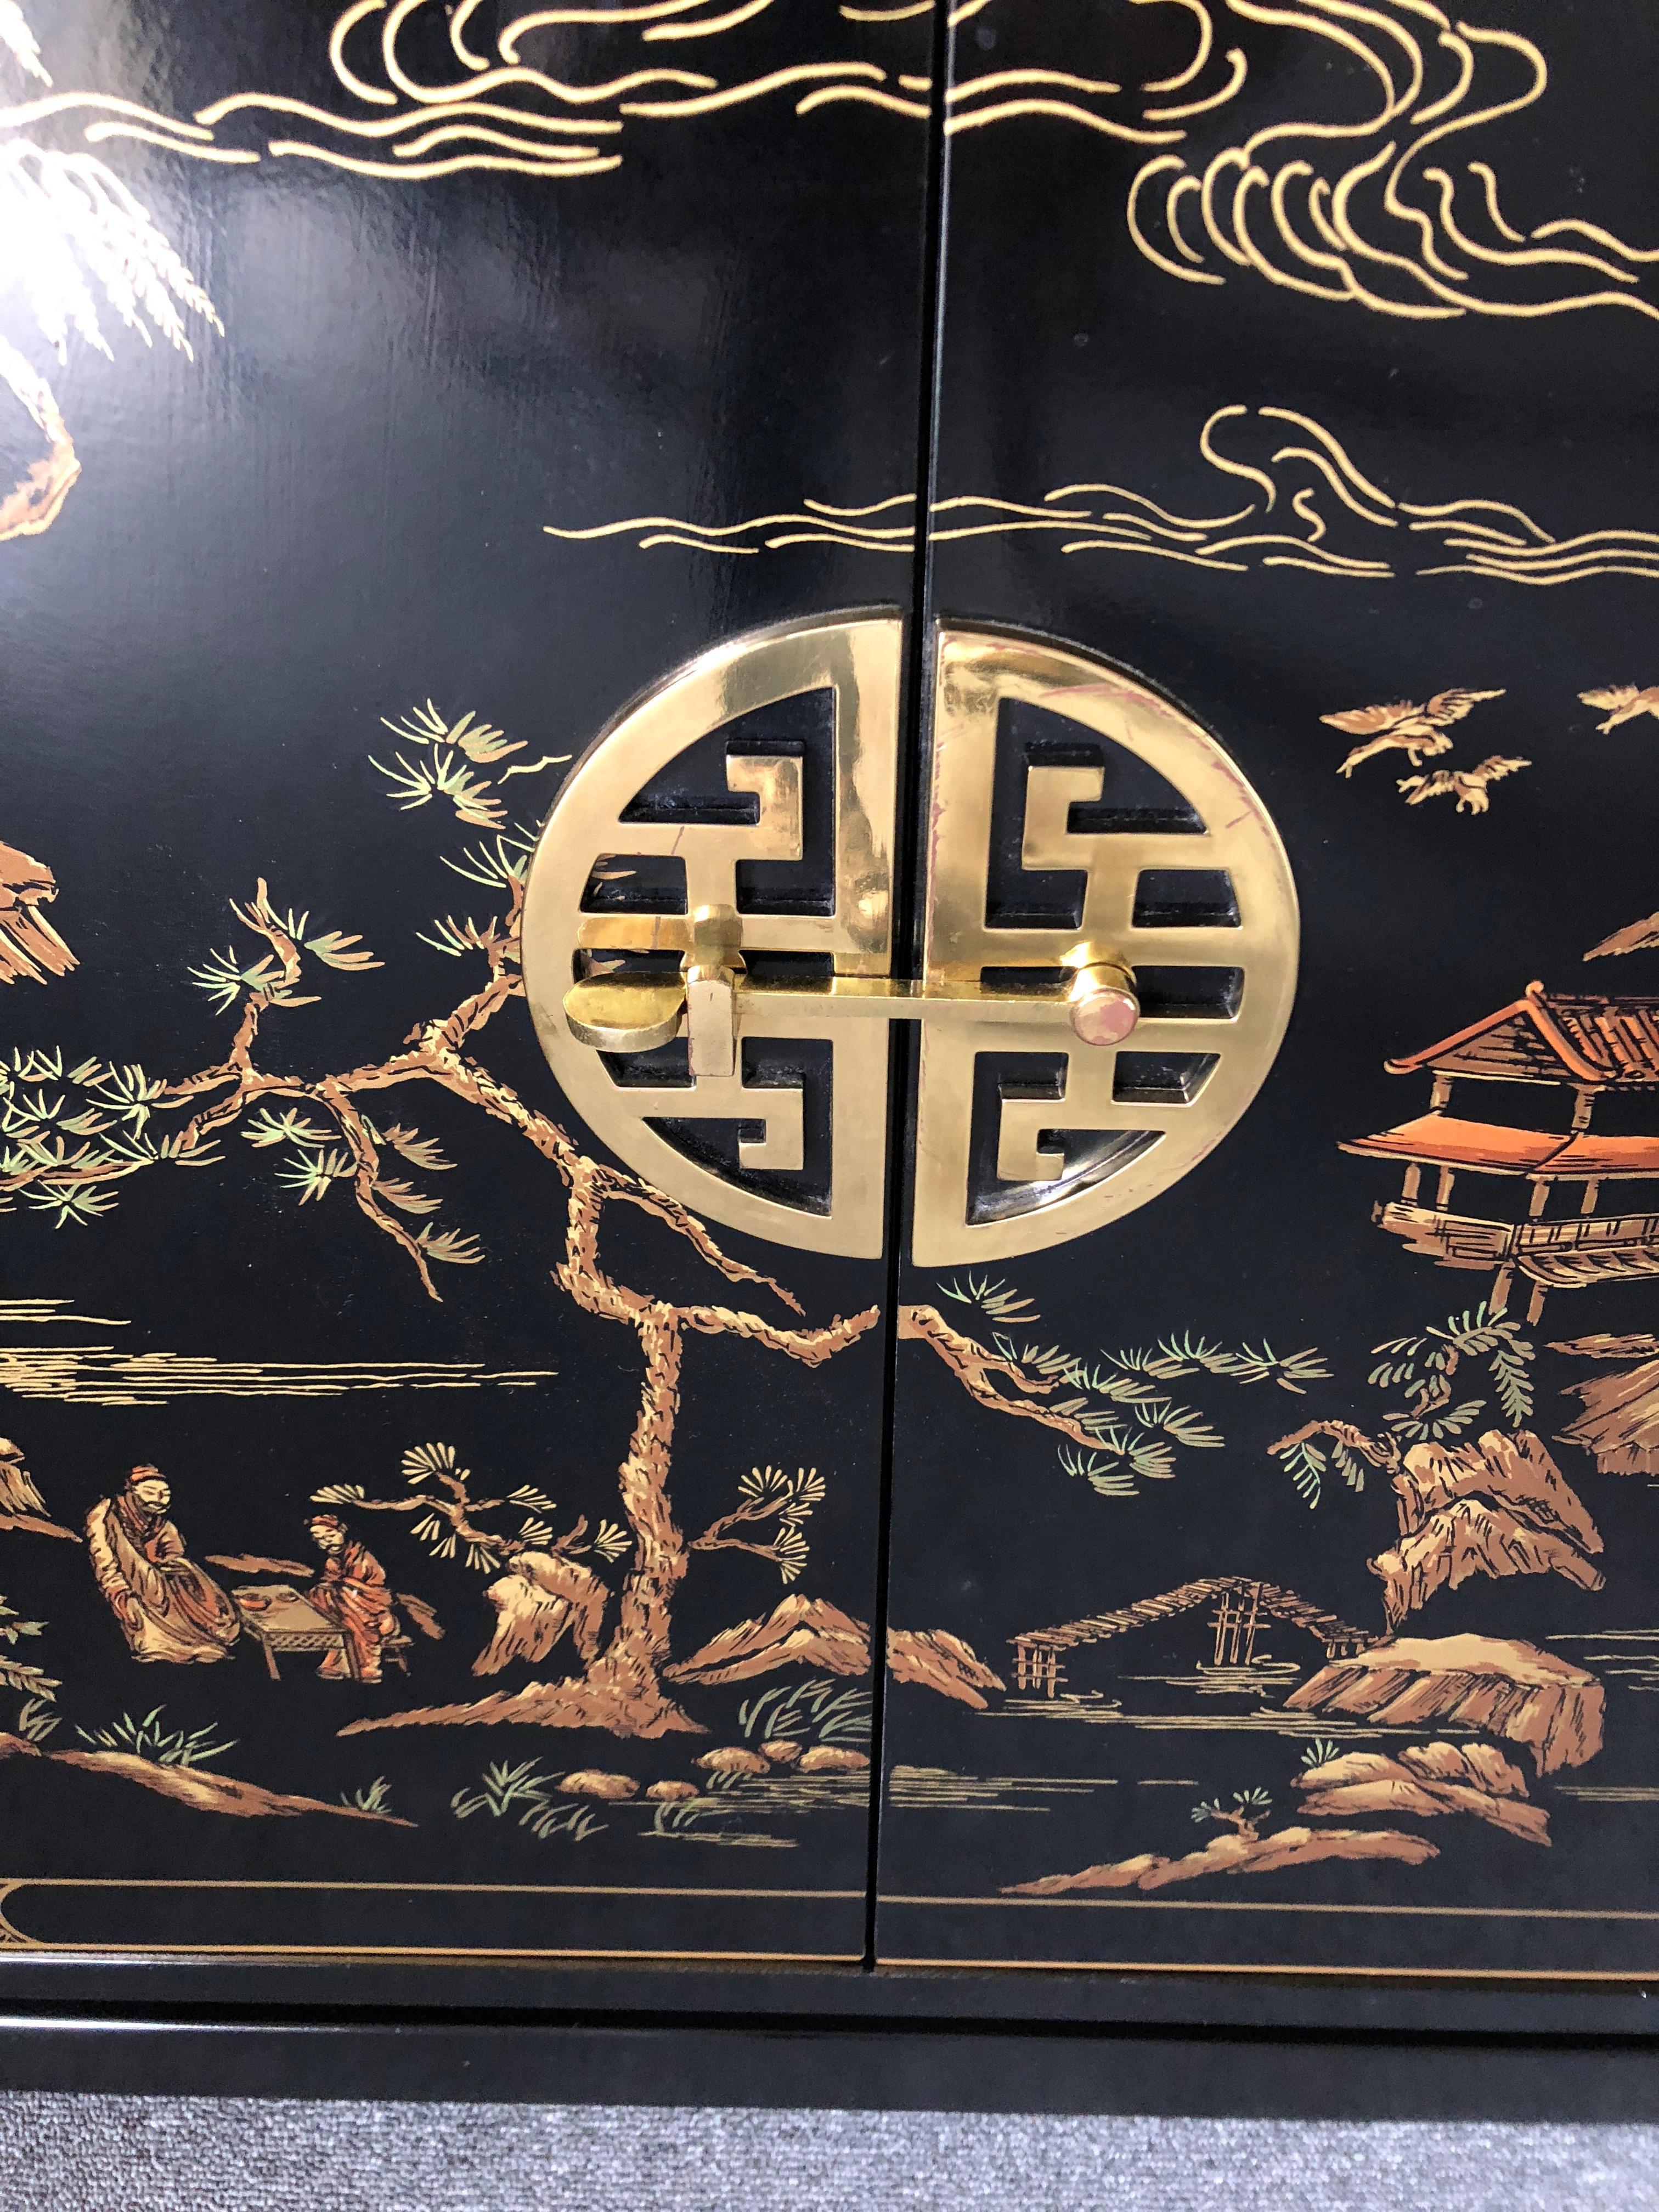 Elegant sleek black chinoiserie two-door cabinet having lovely scenes of Asian landscapes and figures in gold, cream, and orange, with a handsome round Chinese style latch and single shelf inside.